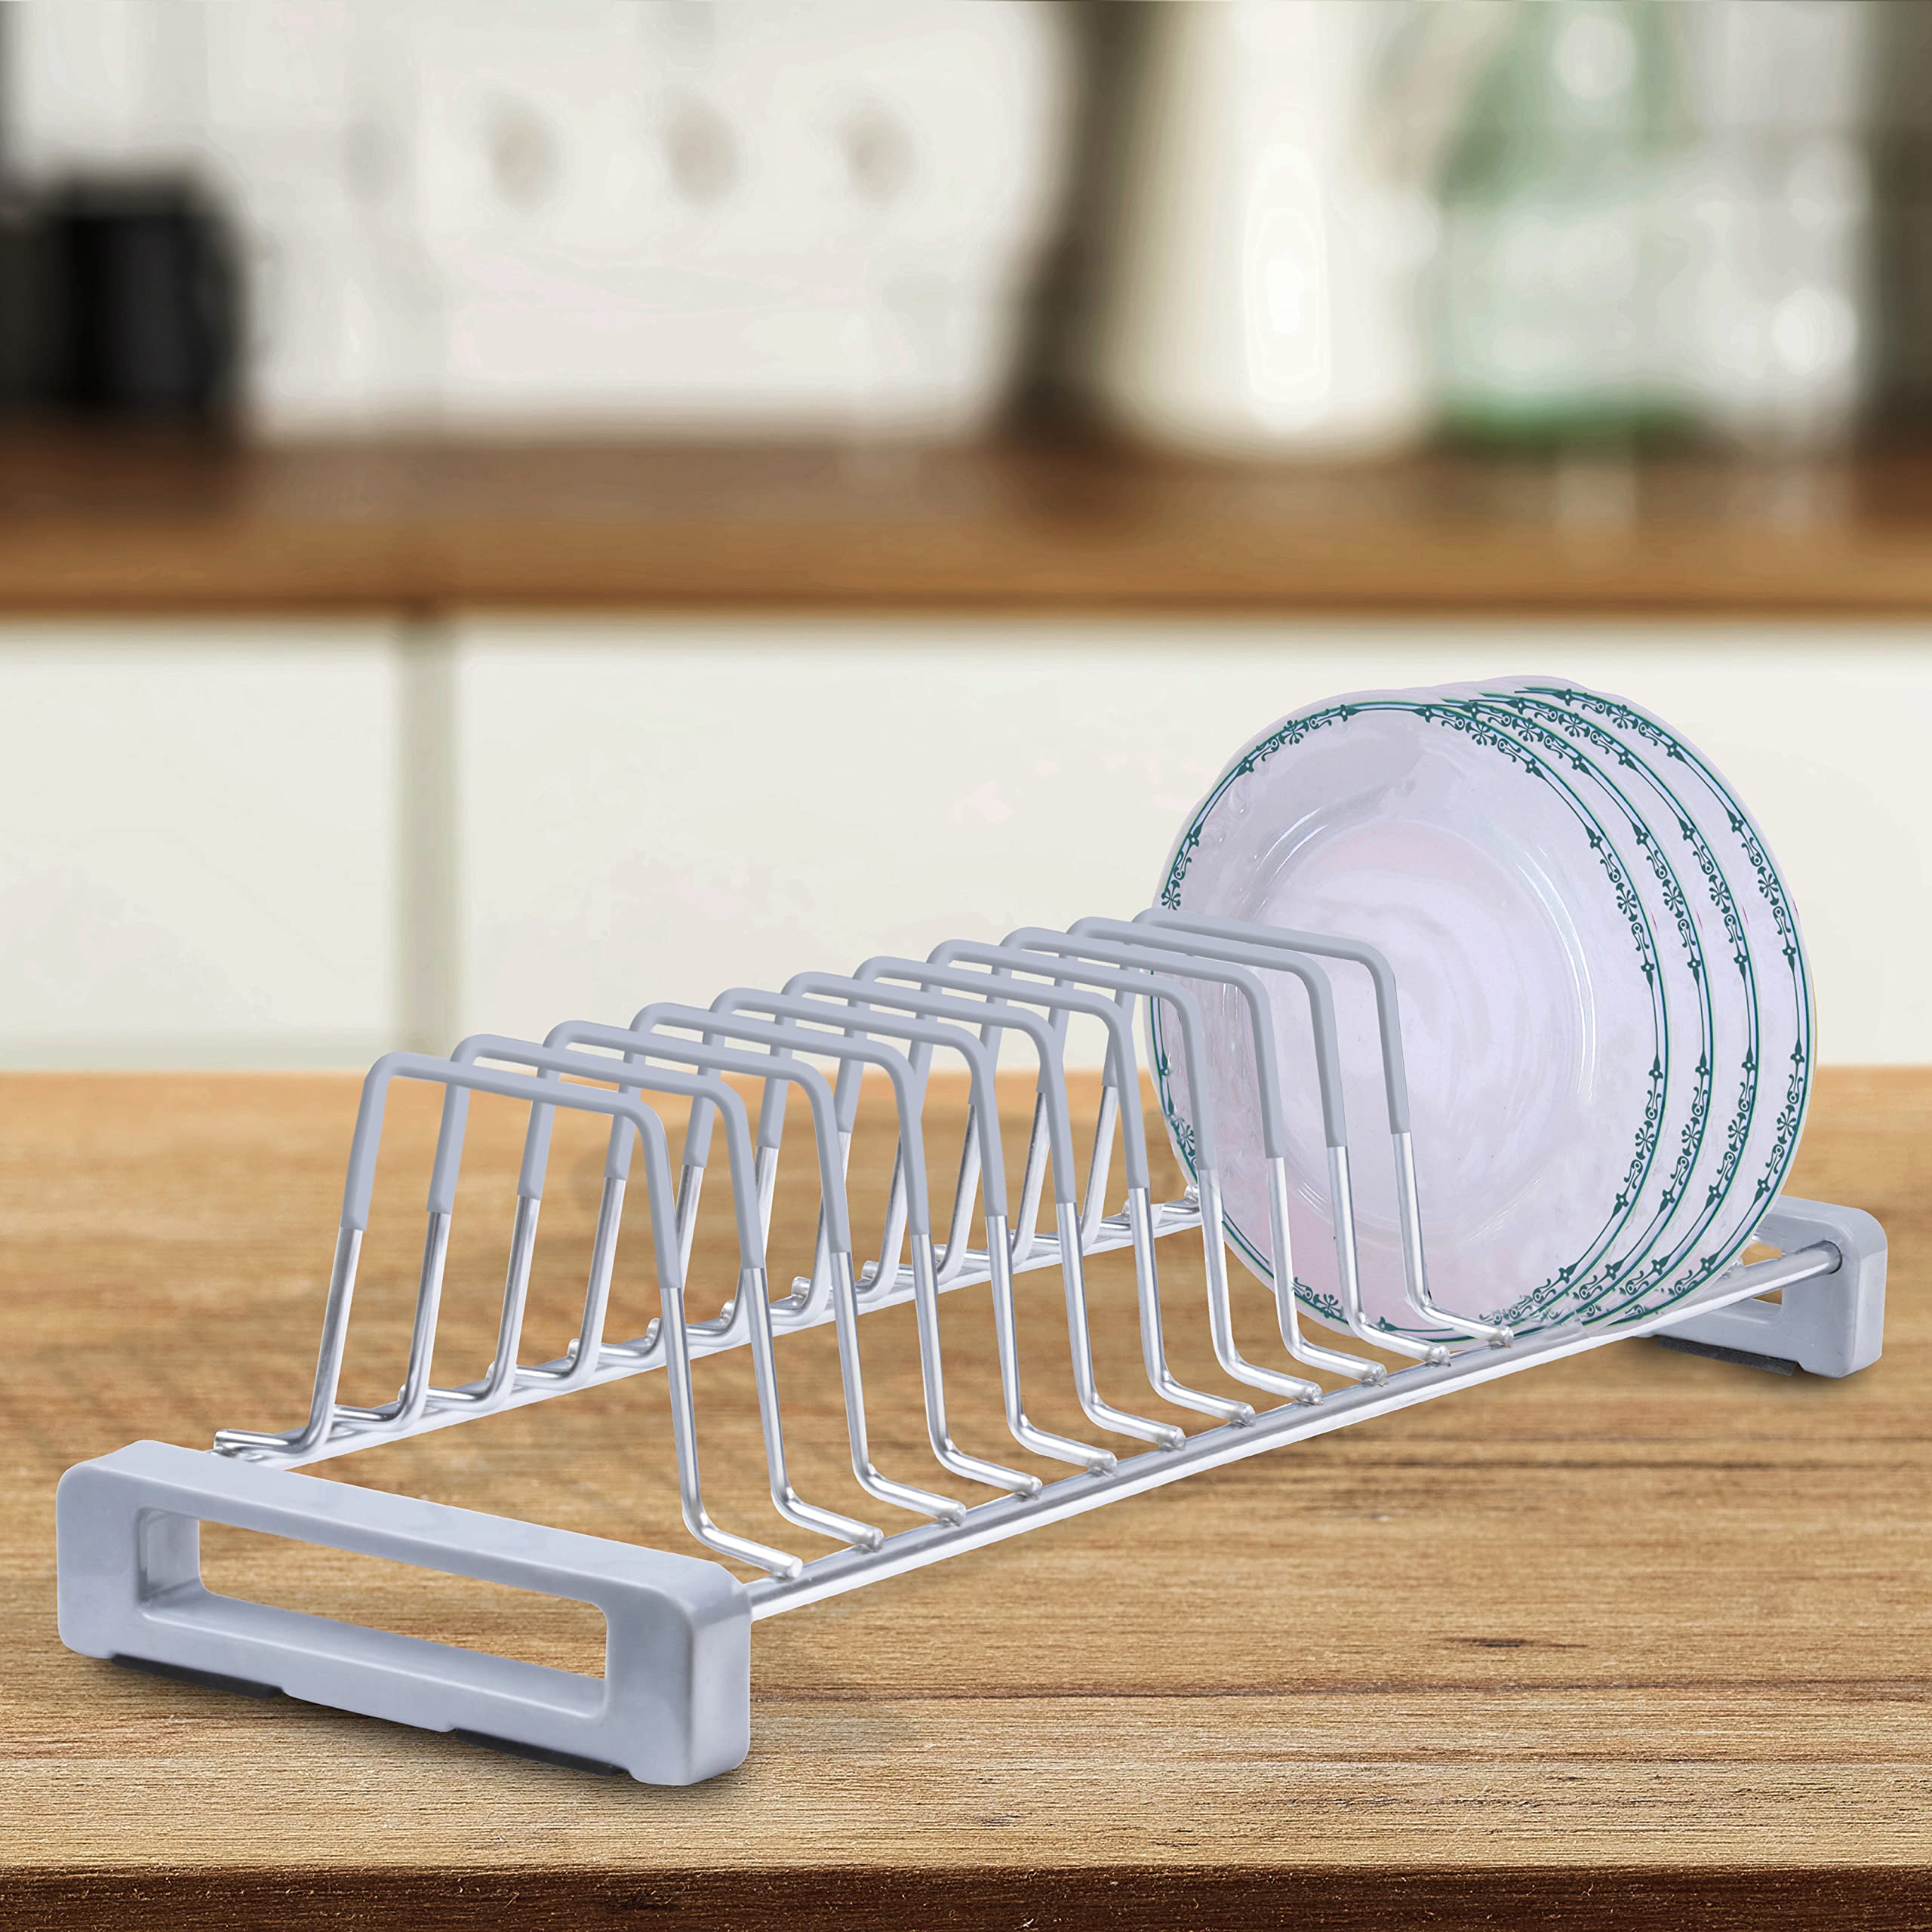 Plantex Stainless Steel Saucer Stand/Plate Stand/Utensil Rack for Modular Kitchen Basket/Tandem Box Accessories (Chrome)